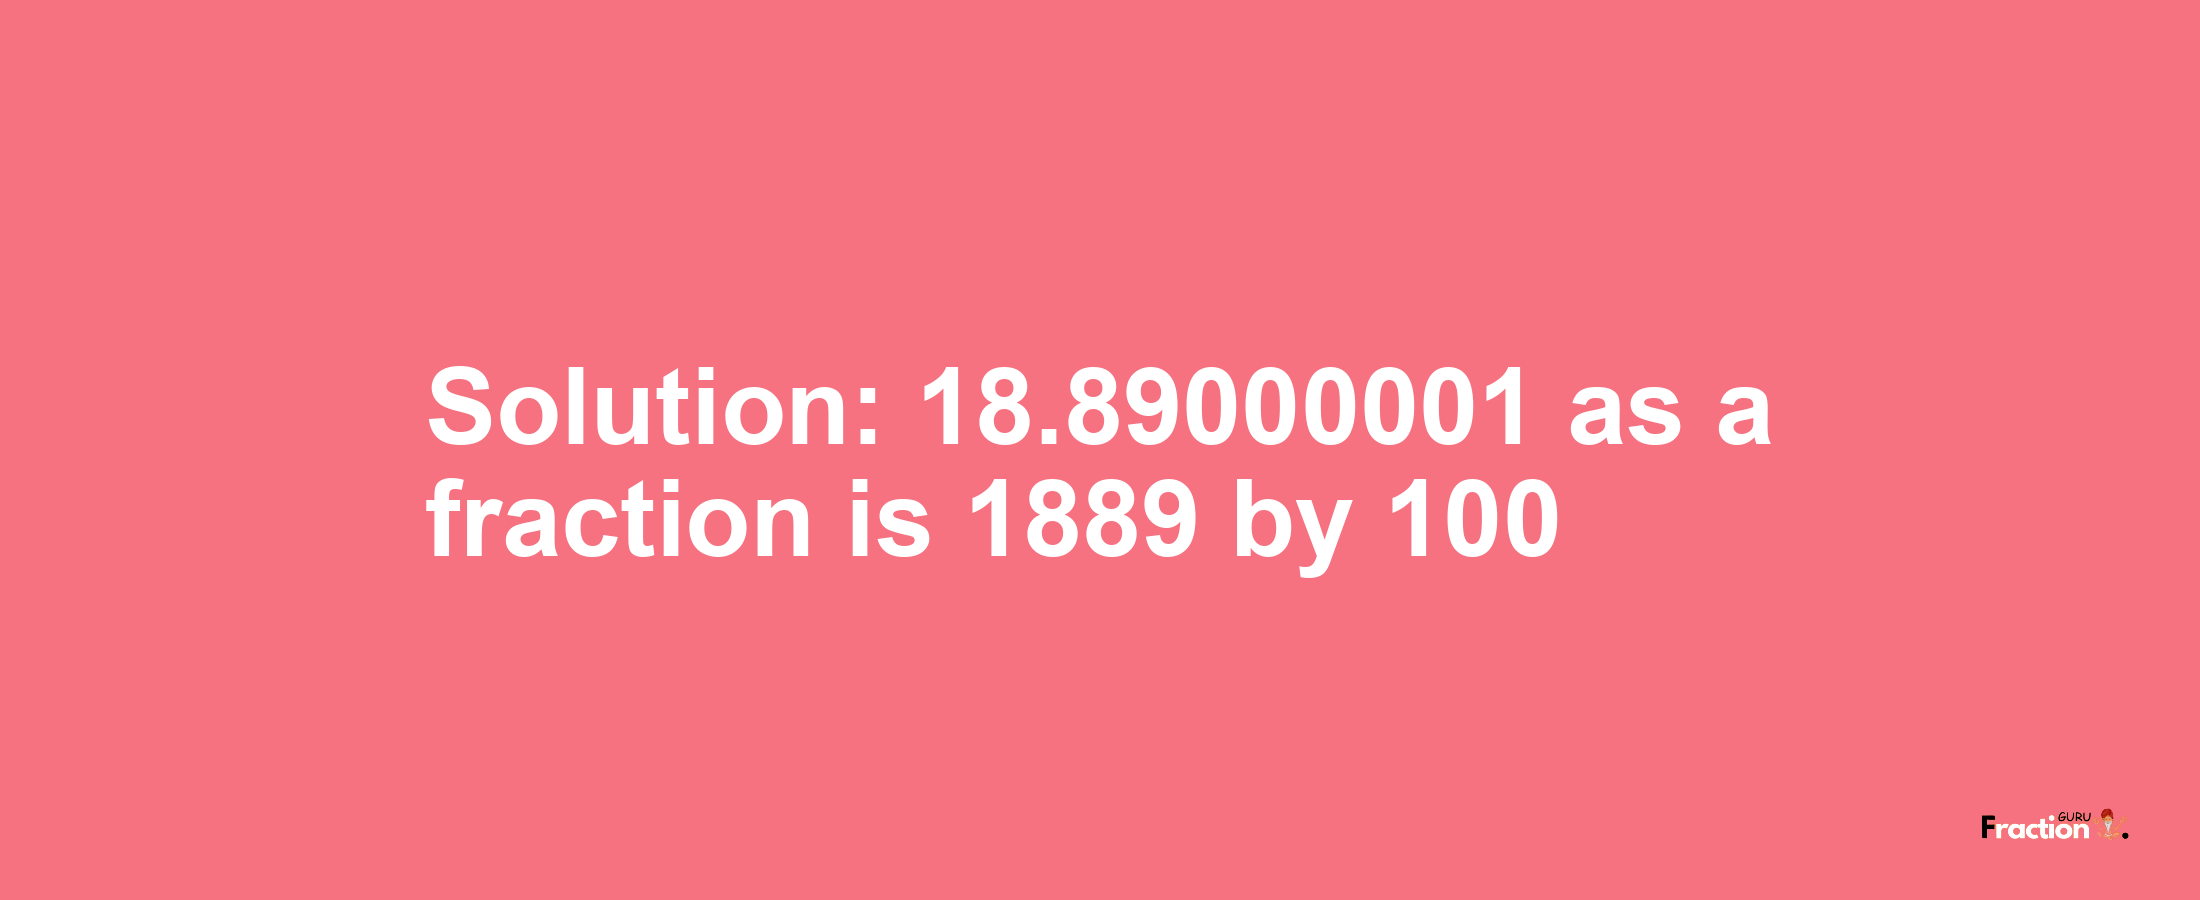 Solution:18.89000001 as a fraction is 1889/100